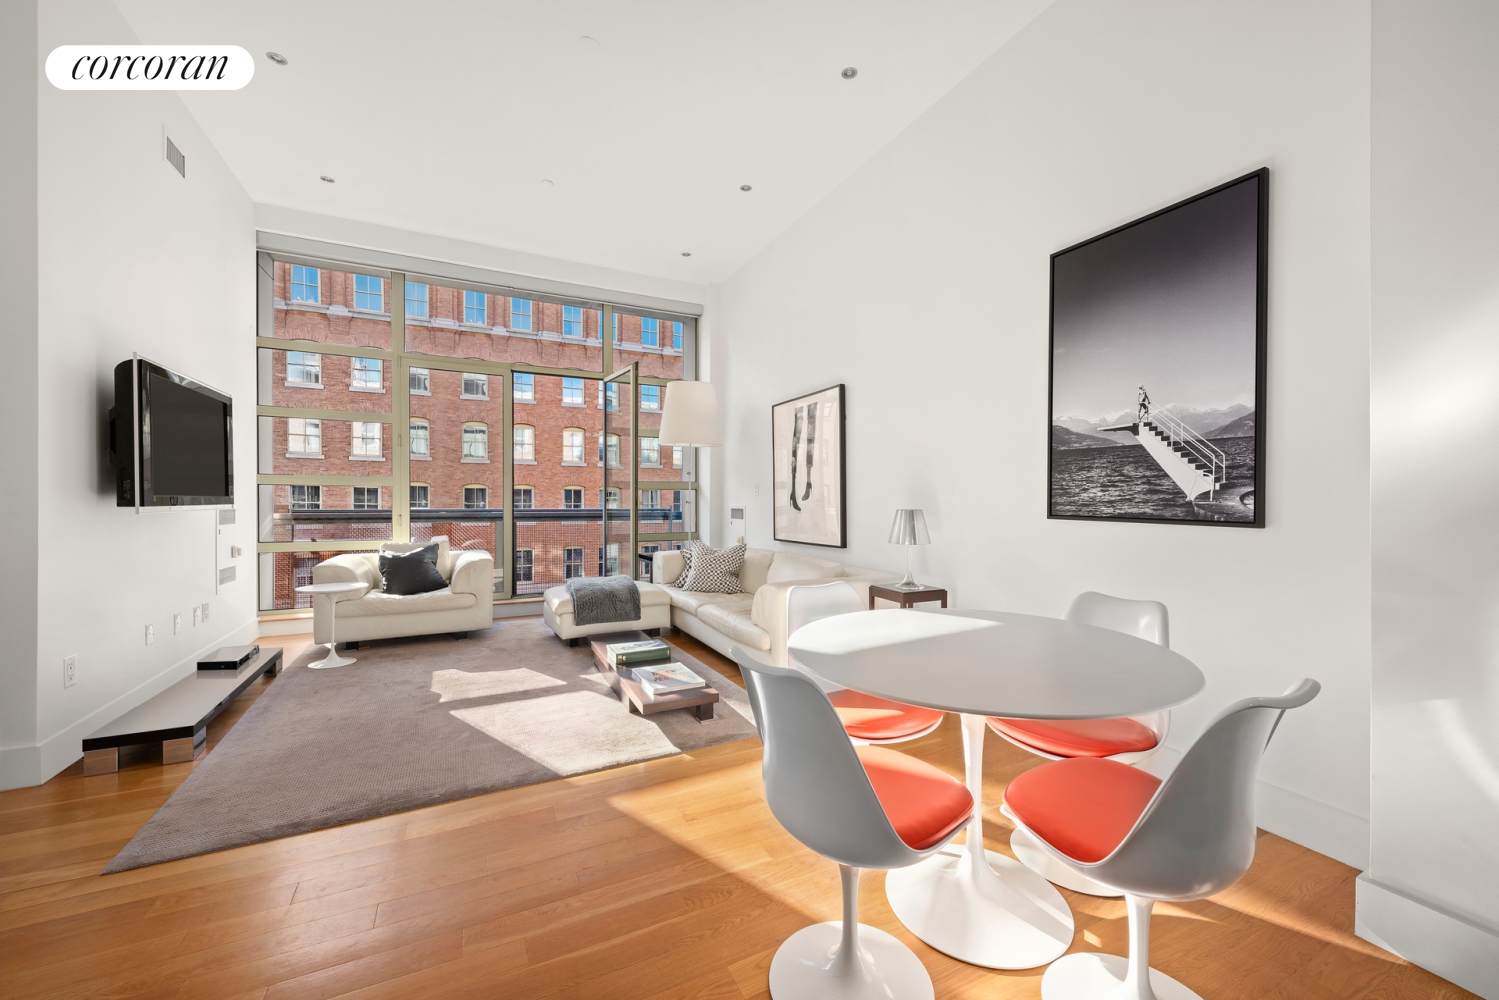 48 Laight Street 4N, Tribeca, Downtown, NYC - 2 Bedrooms  
2 Bathrooms  
4 Rooms - 